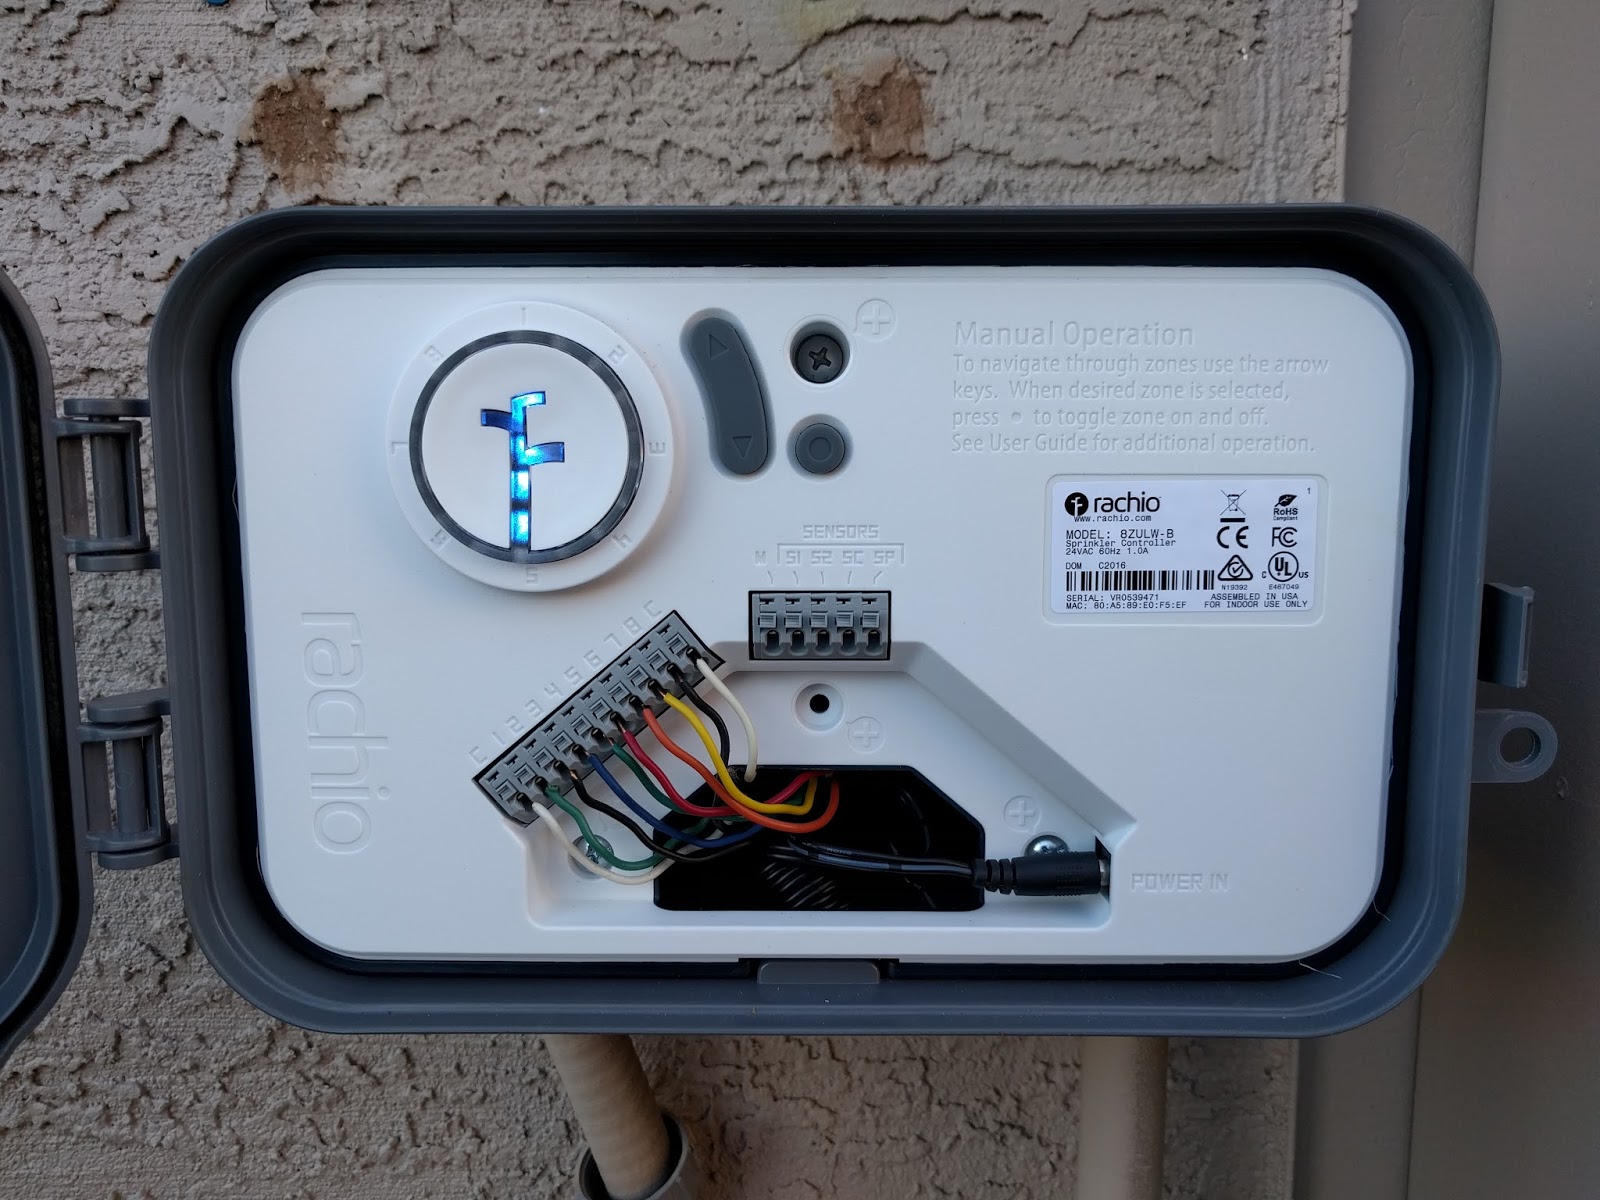 Moving to the Rachio Sprinkler Controller